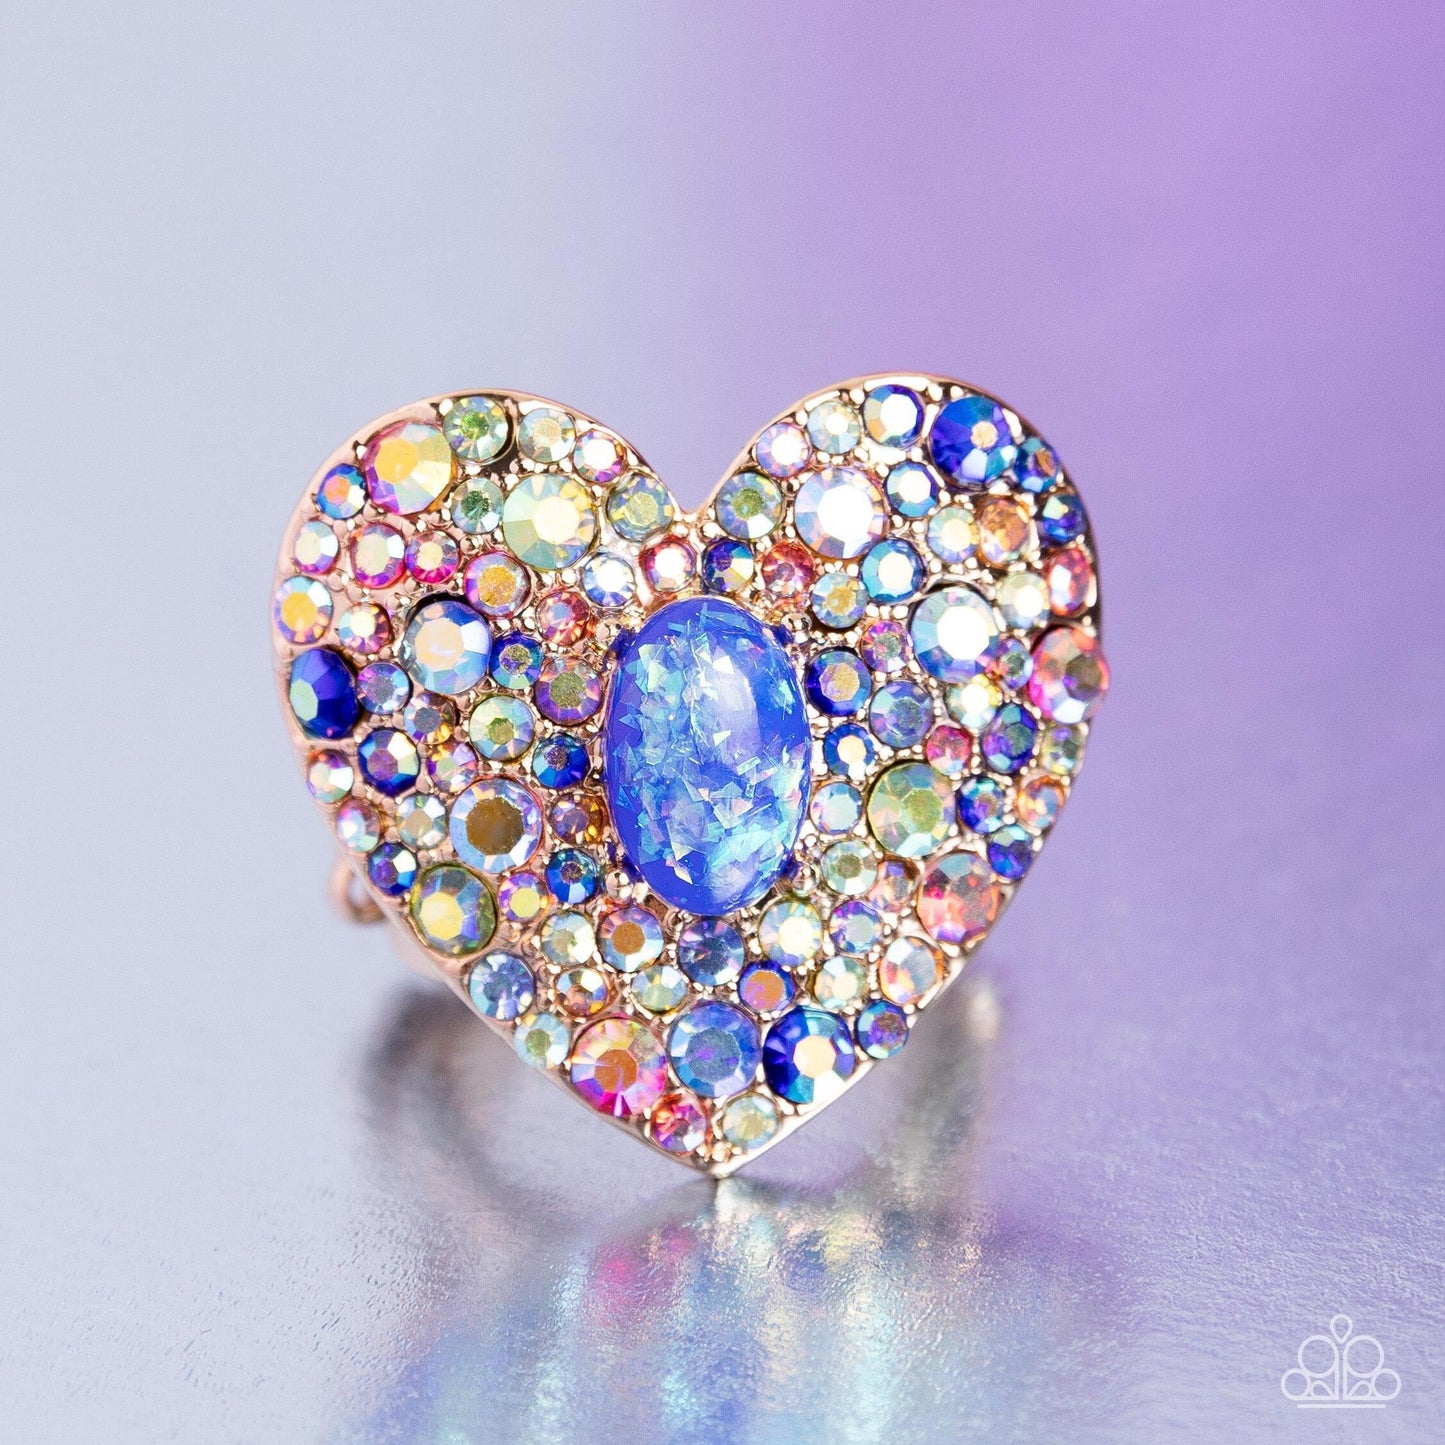 Bejeweled Beau Blue Ring - Paparazzi Accessories  Encrusted in brilliant multicolored and iridescent rhinestones, a glittery gold heart frame adorns the center of an airy gold band for a flirtatious finish. Featuring iridescent flecks, an opalescent blue oval bead is pressed in the center of the heart frame for additional eye-catching shimmer. Features a stretchy band for a flexible fit. Due to its prismatic palette, color may vary.  Sold as one individual ring.  P4ST-BLXX-029XX